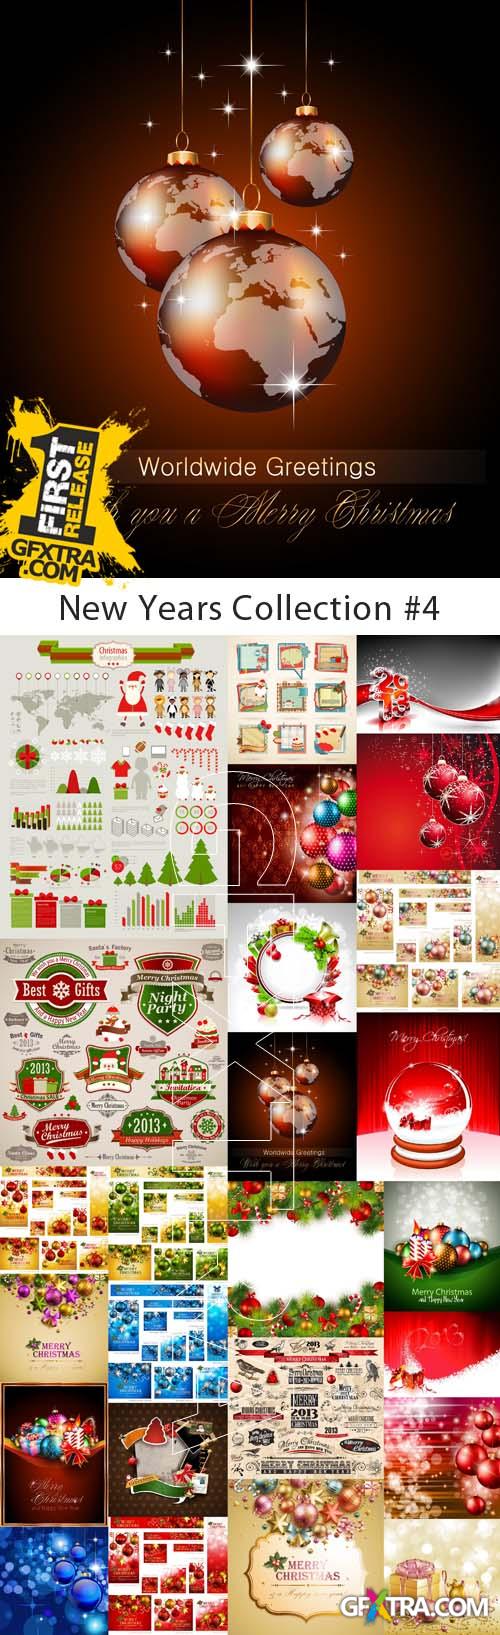 New Years Collection #4 - 25 EPS Vector Stock